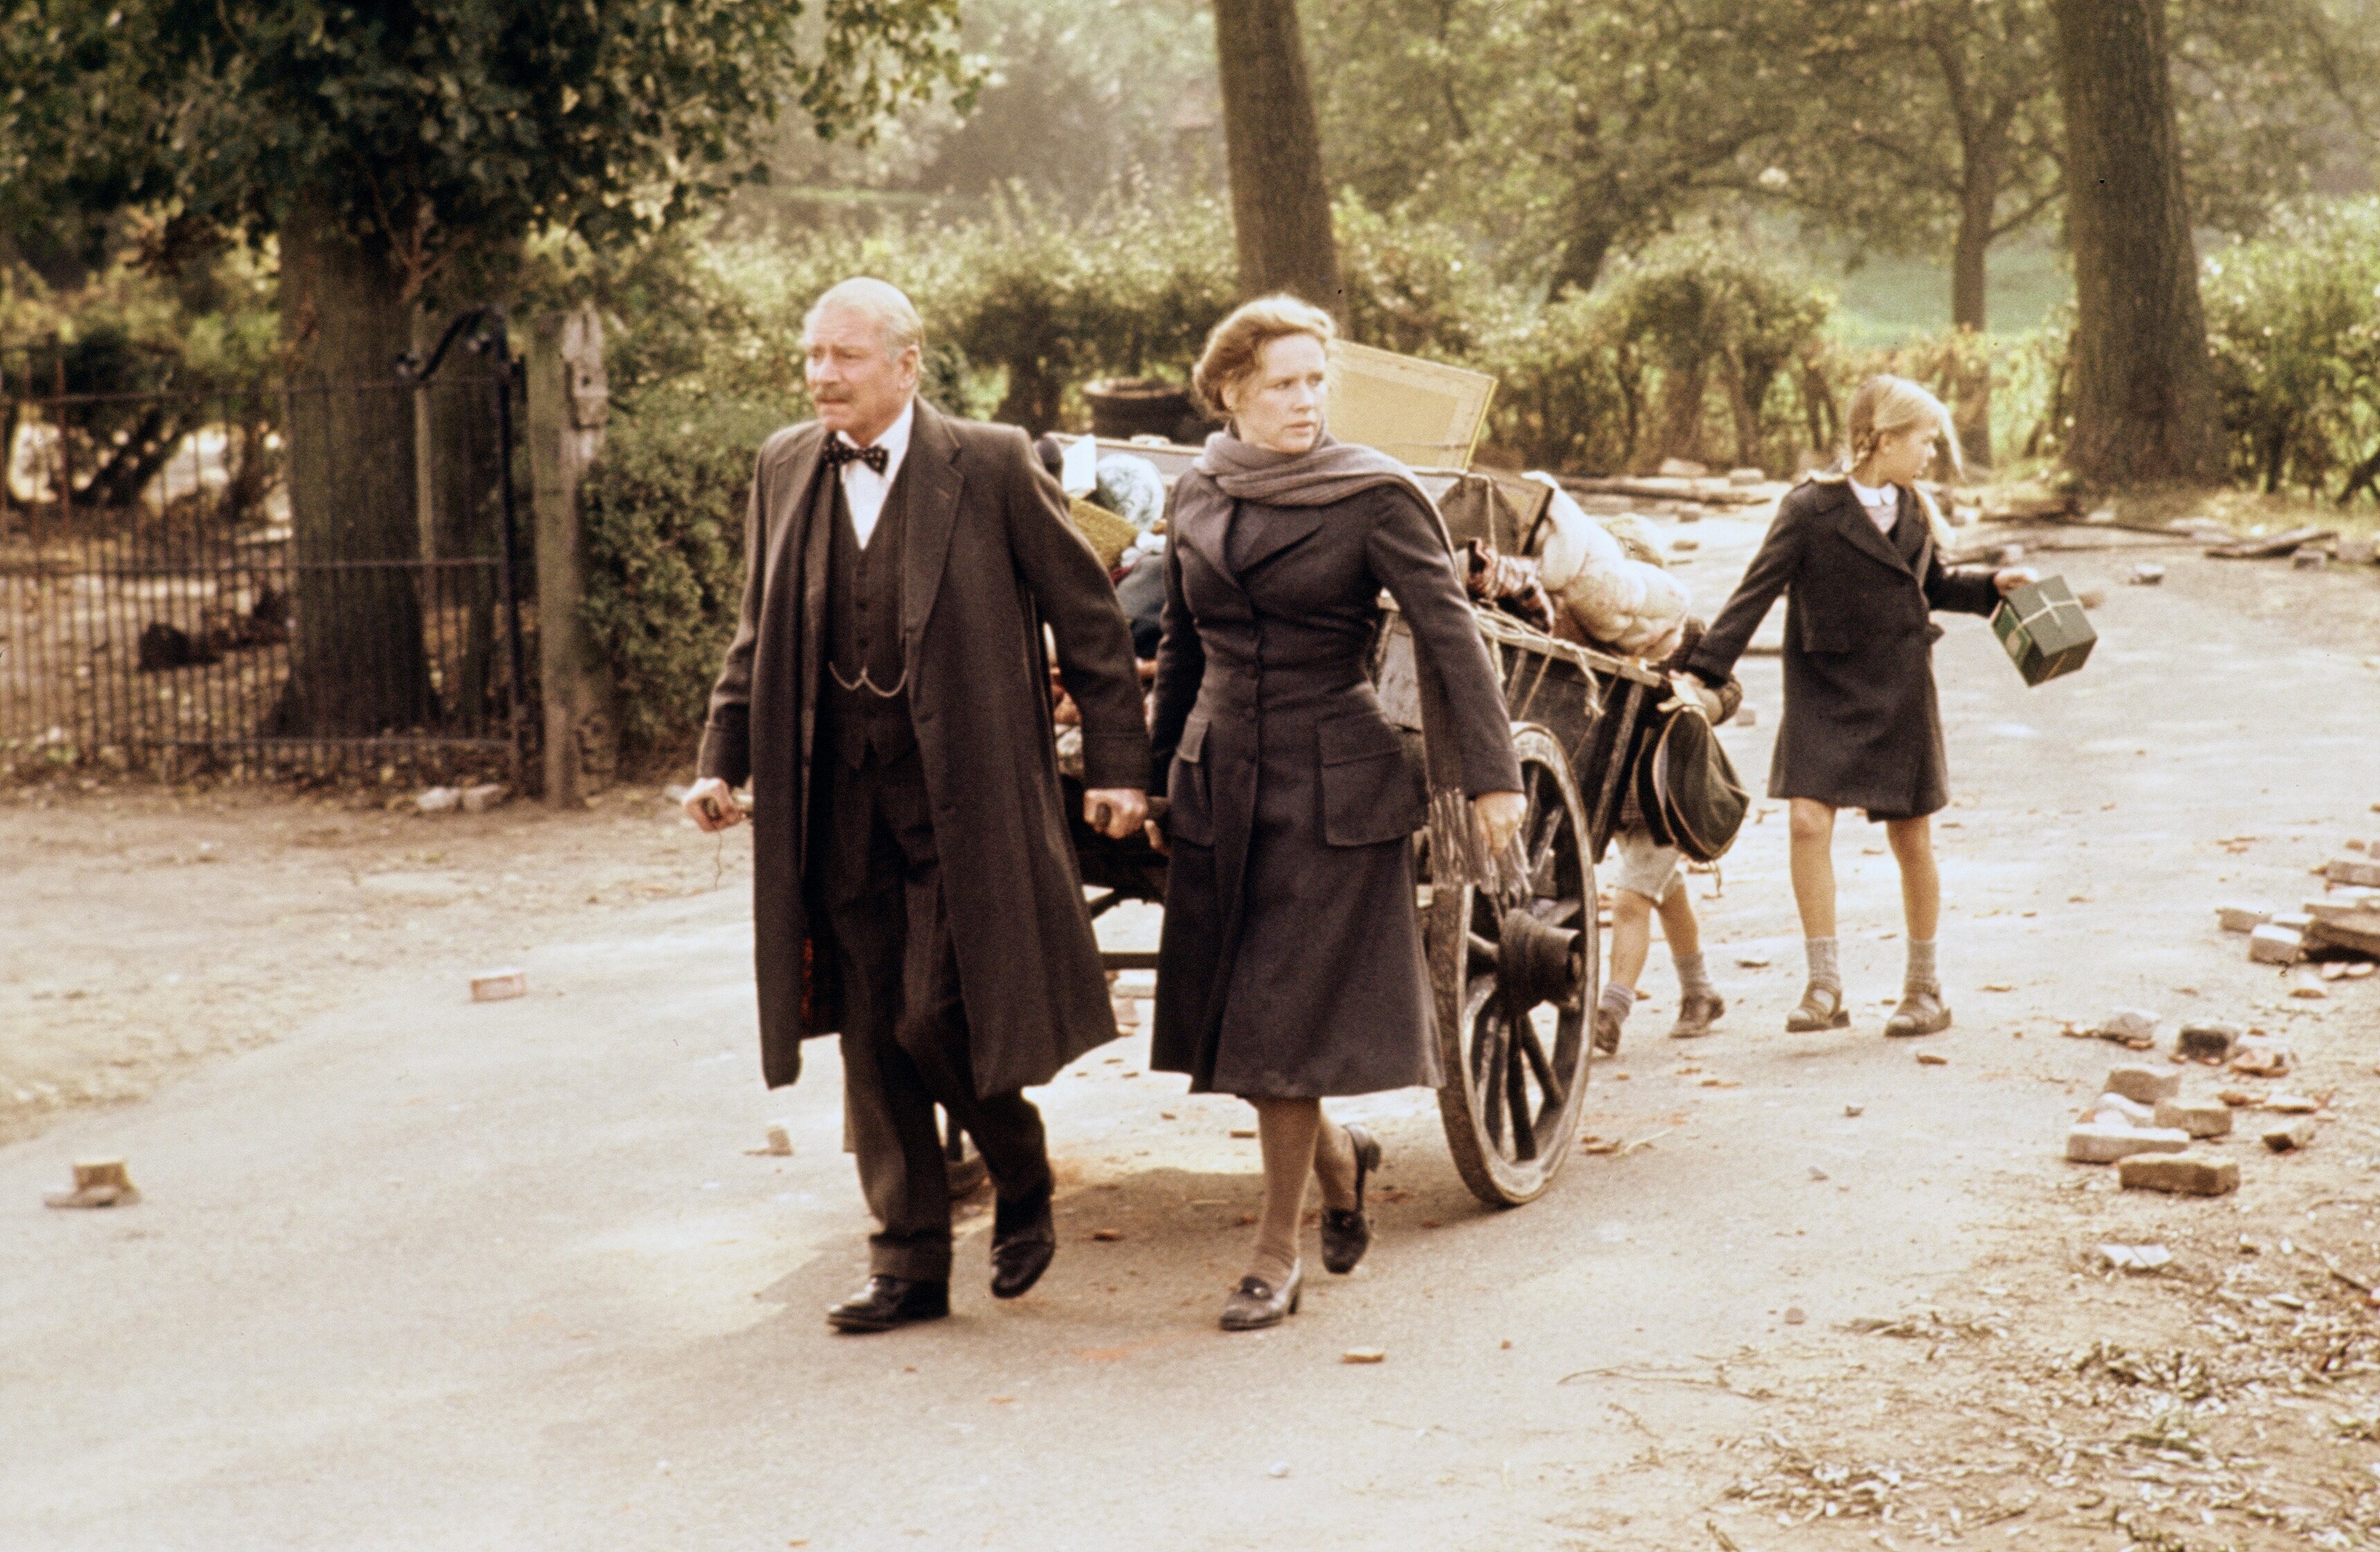 Still of Laurence Olivier and Liv Ullmann in A Bridge Too Far (1977)